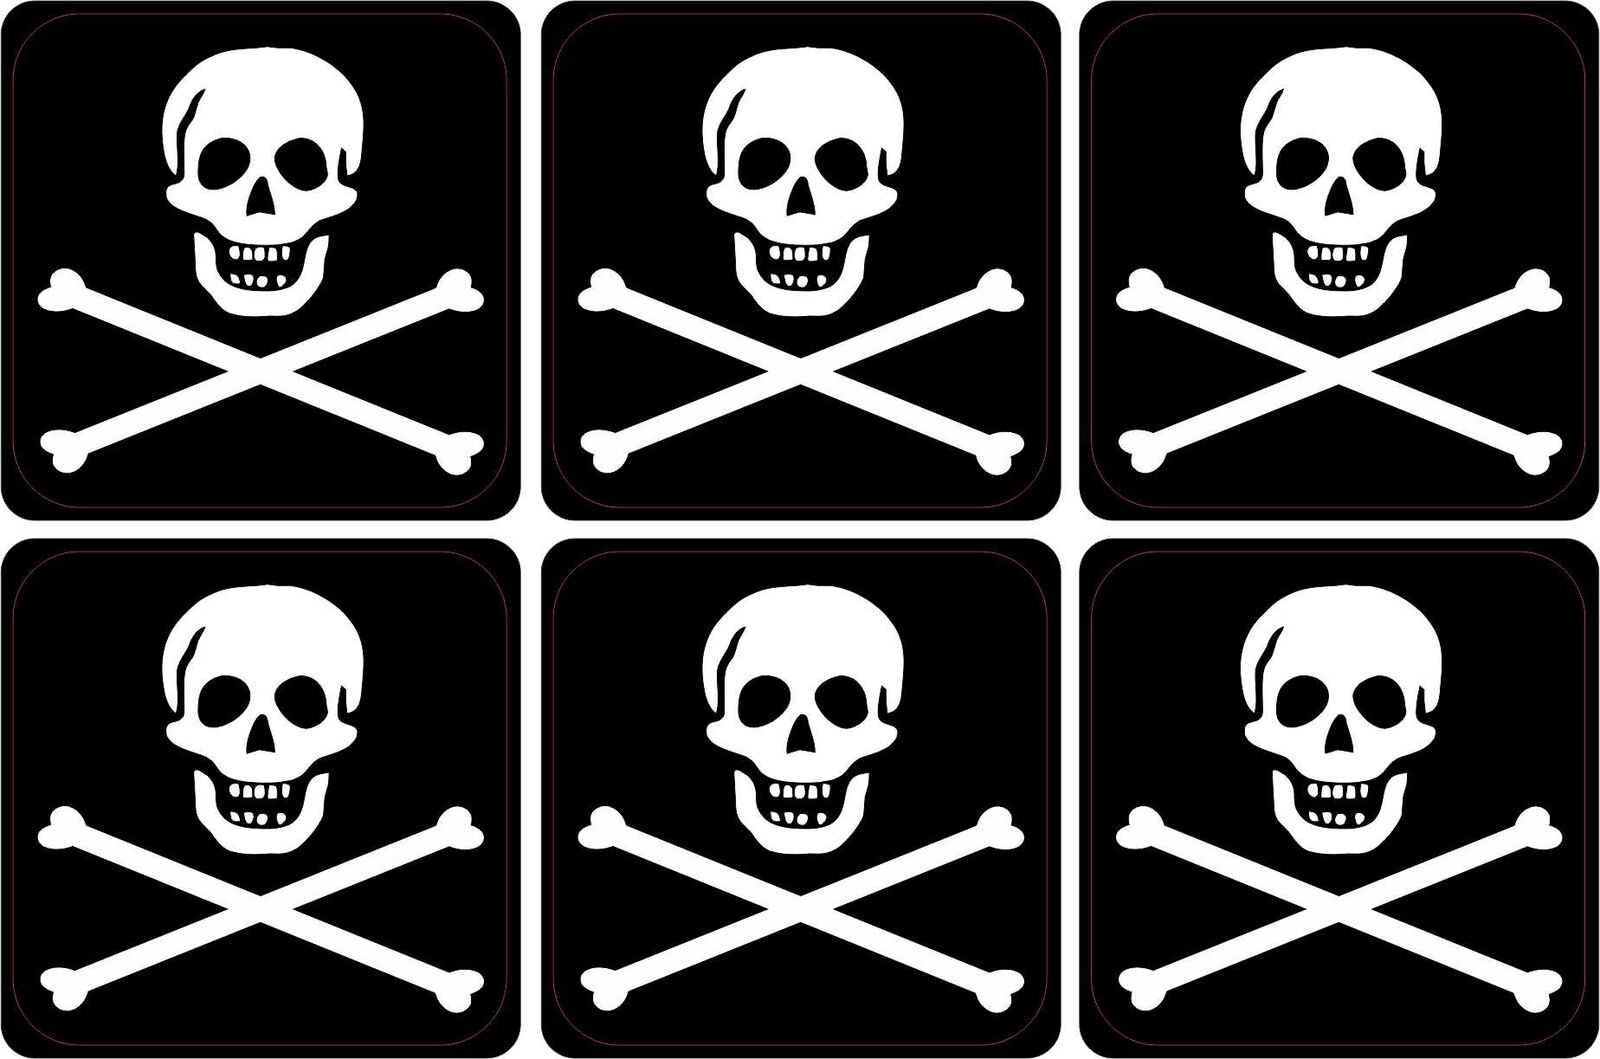 2in x 2in Jolly Roger Pirate Flag Stickers Car Truck Vehicle Bumper Decal